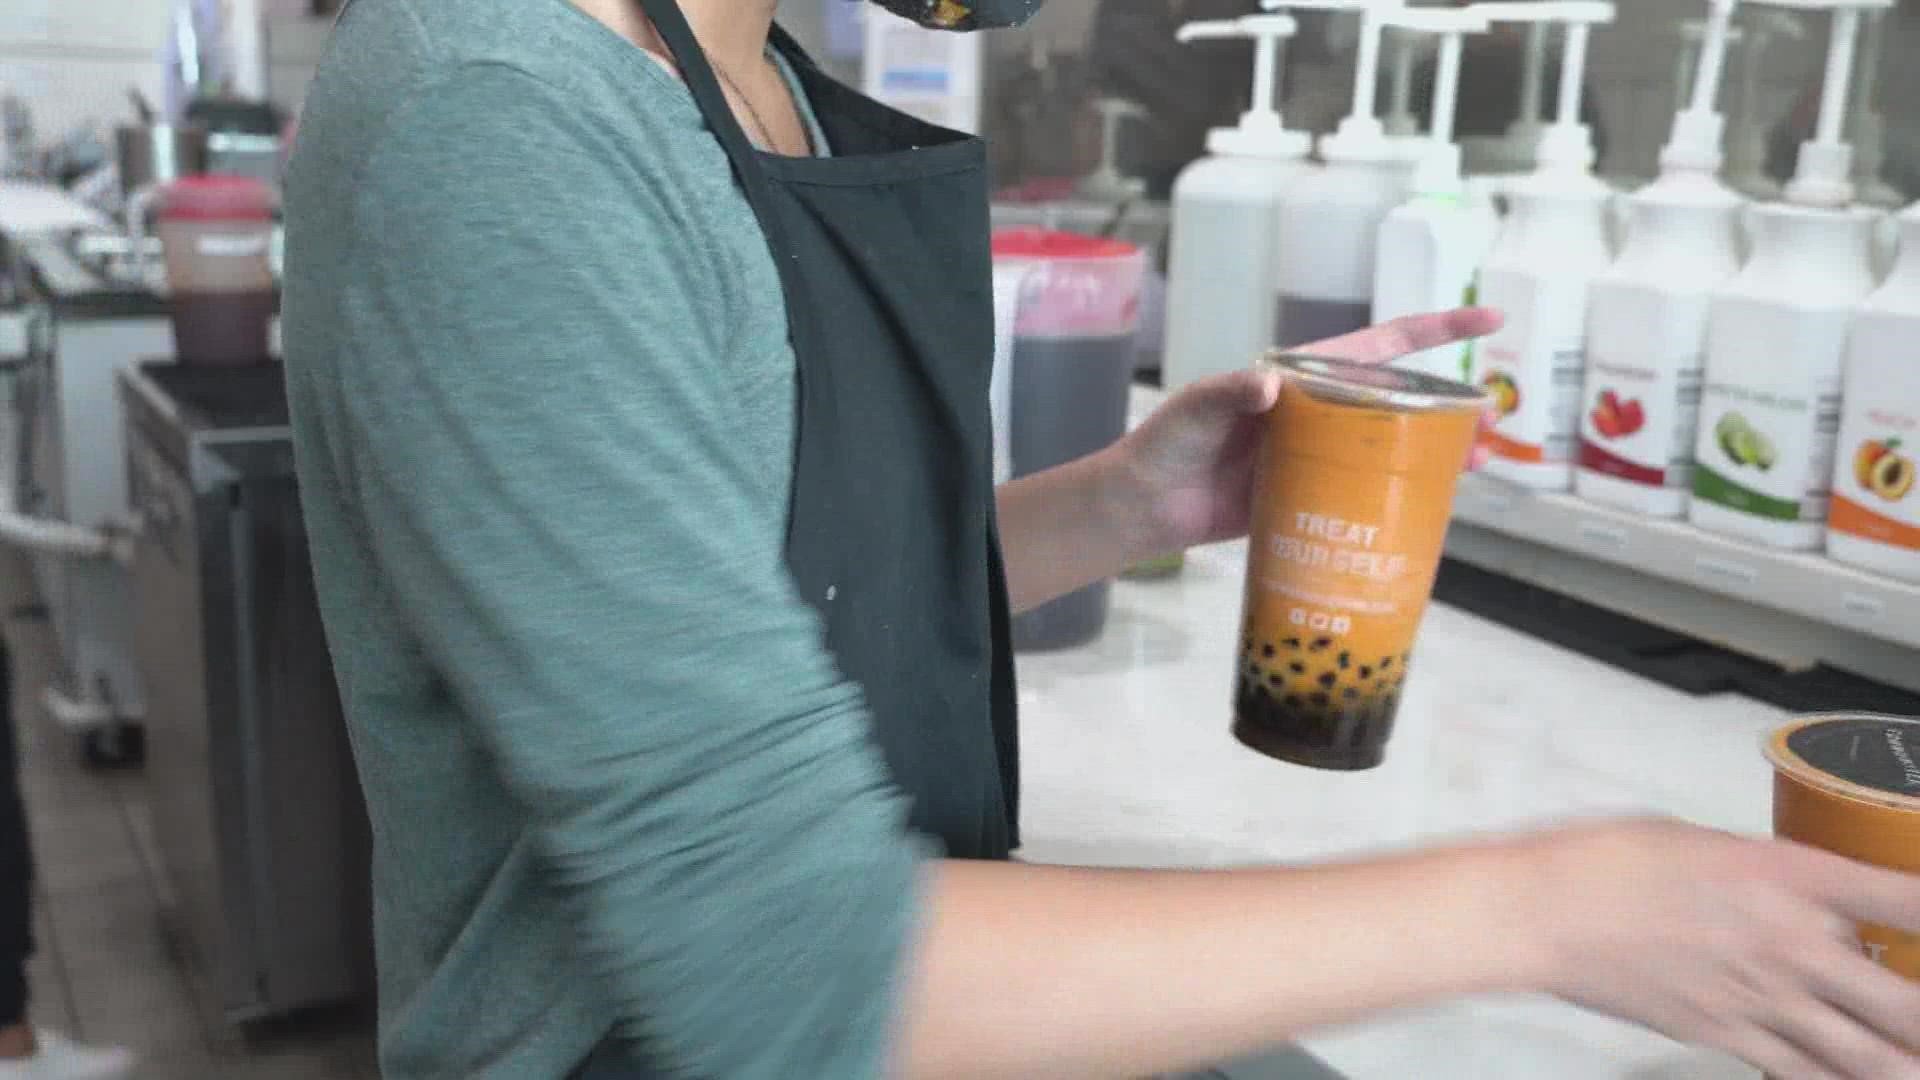 The team at Boba Republic in Allen love to share this Asian culture through a cup of tea.